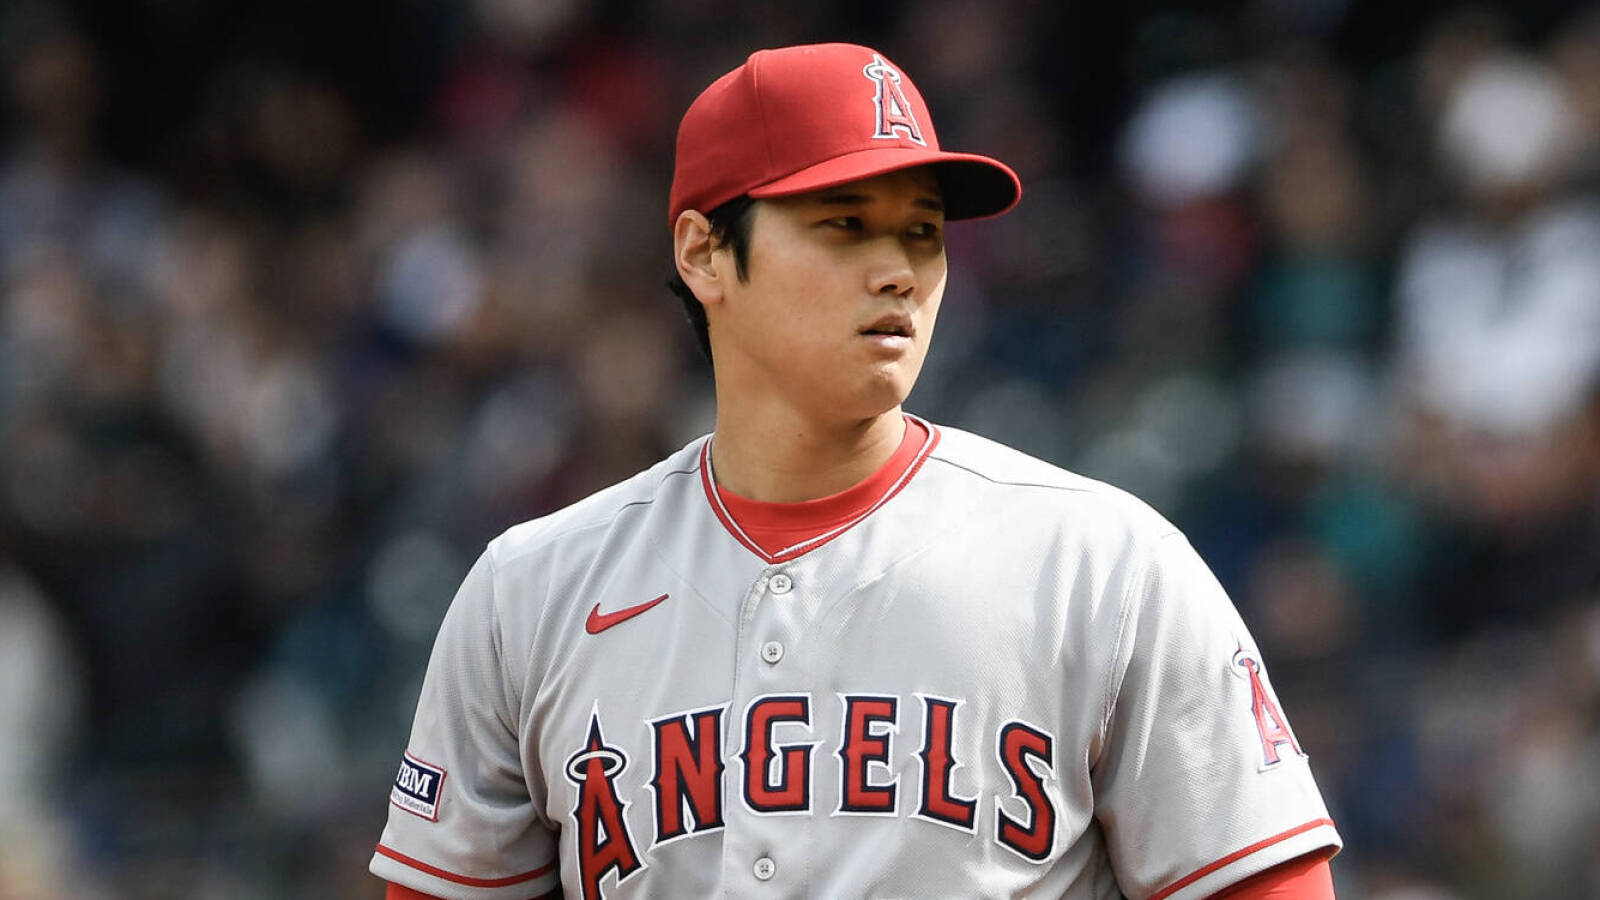 Insider: Shohei Ohtani 'thinking' about playing for Yankees